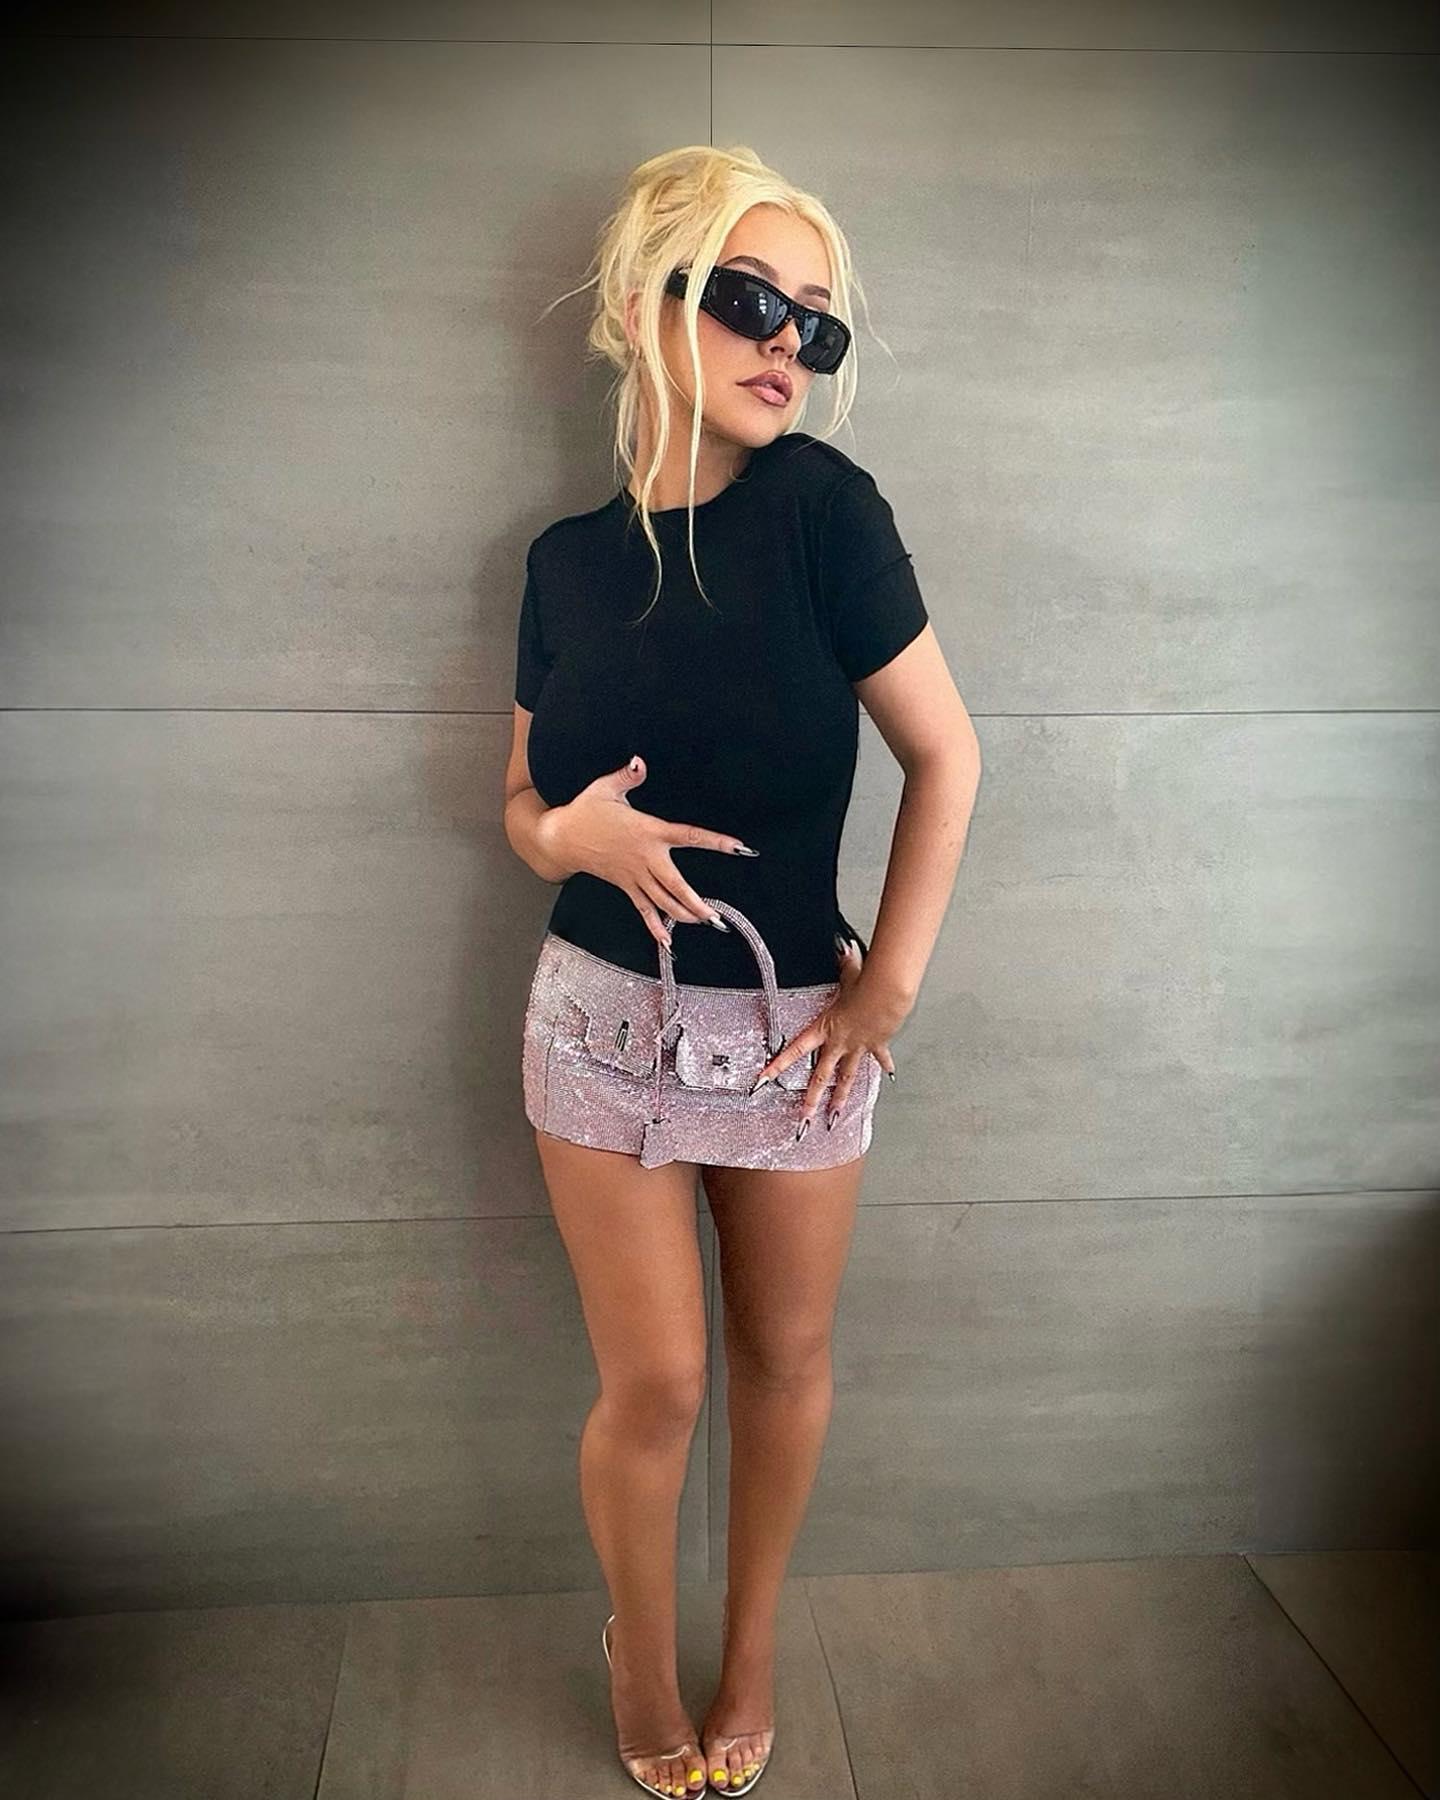 Christina Aguilera 'Is In Her Bag' As Her Spotless Legs Commands Attention